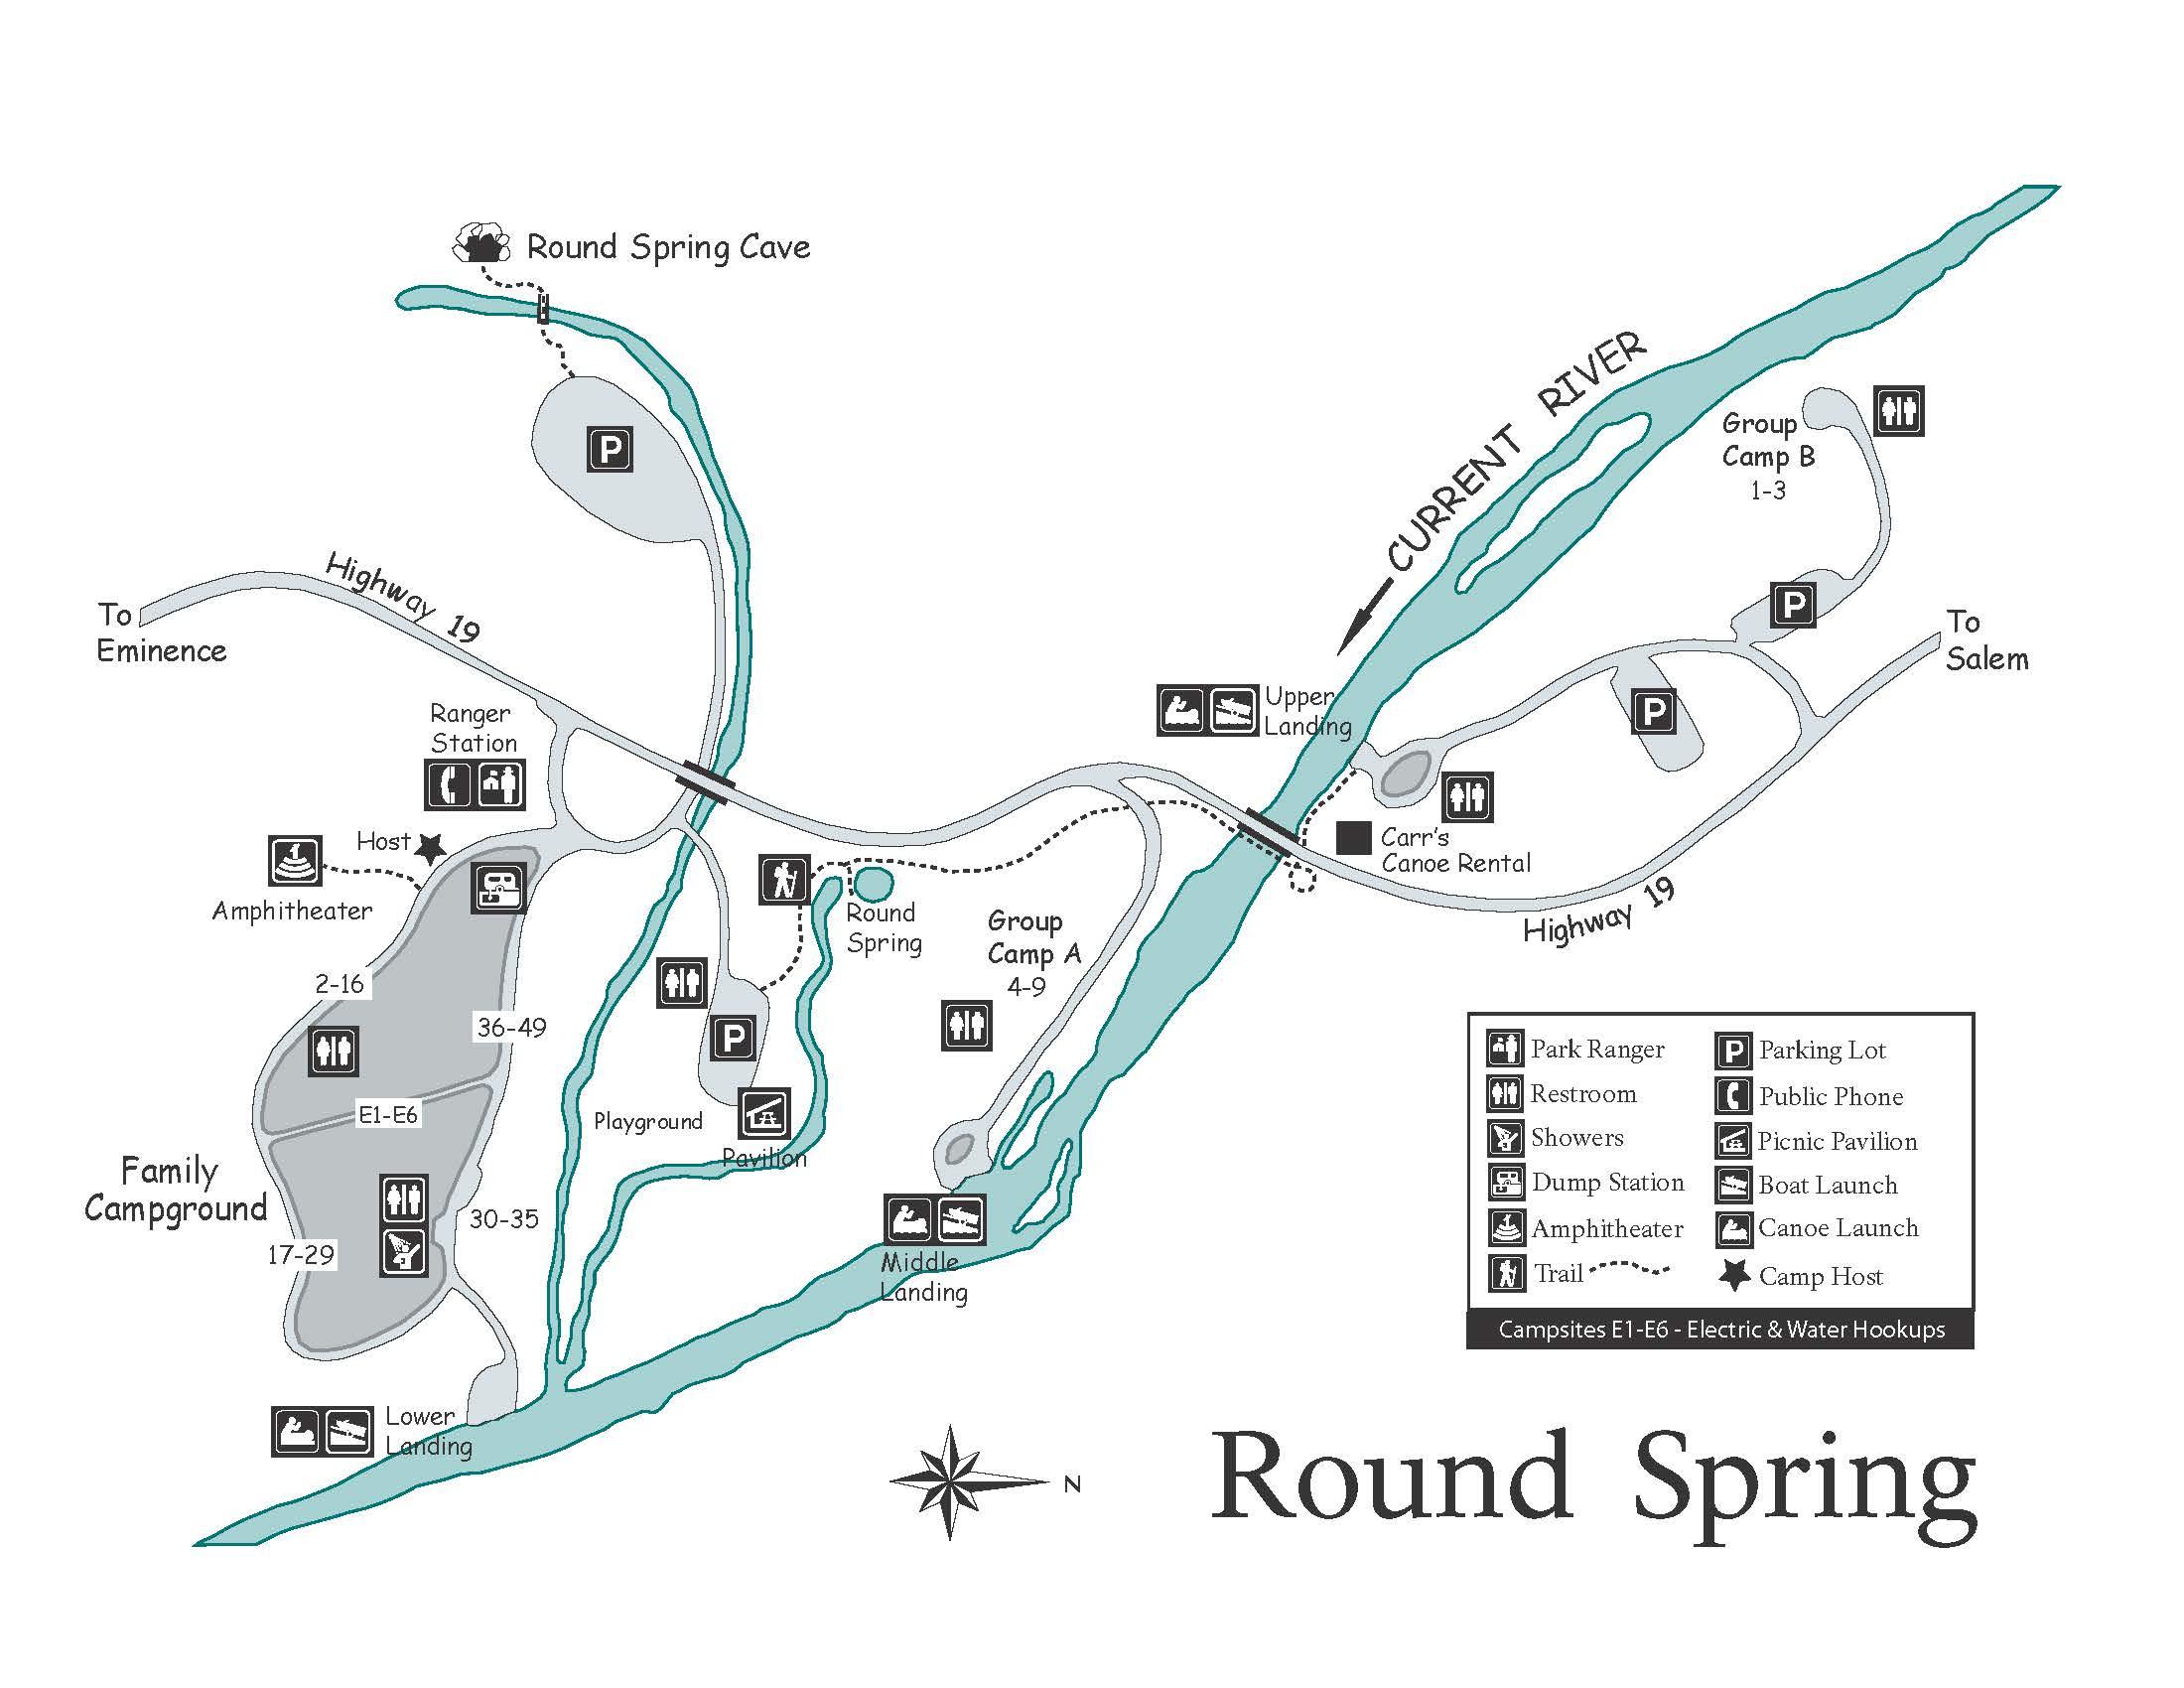 a map showing campsites, restrooms, river access, camp host, ranger station and roads